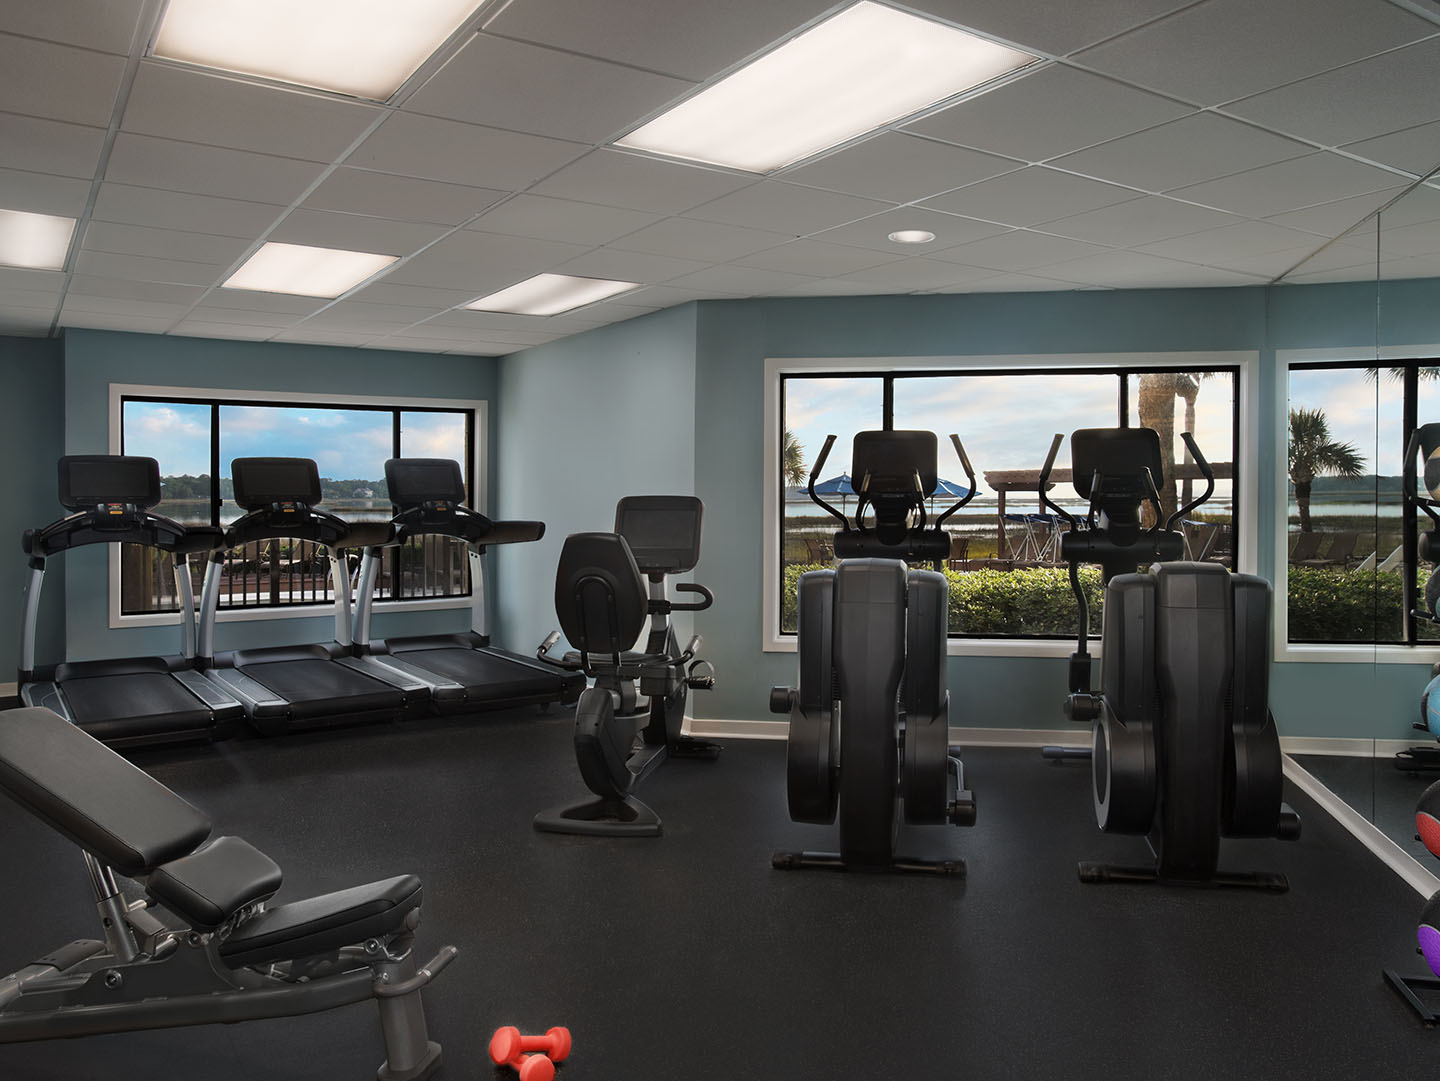 Marriott's Harbour Point Fitness Center. Marriott's Harbour Point is located in Hilton Head Island, South Carolina United States.